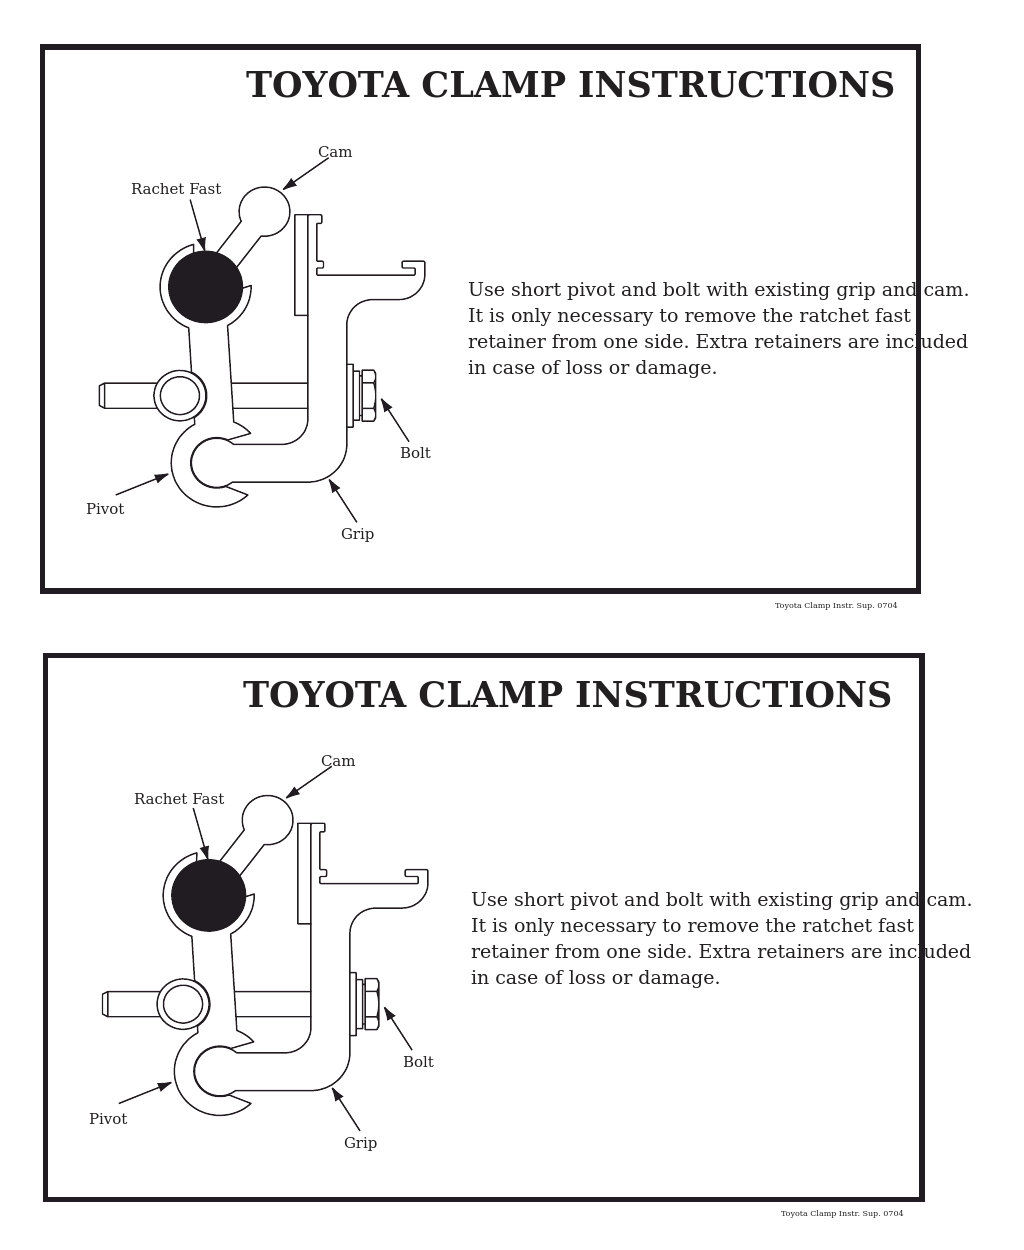 Toyota Clamp Instruction